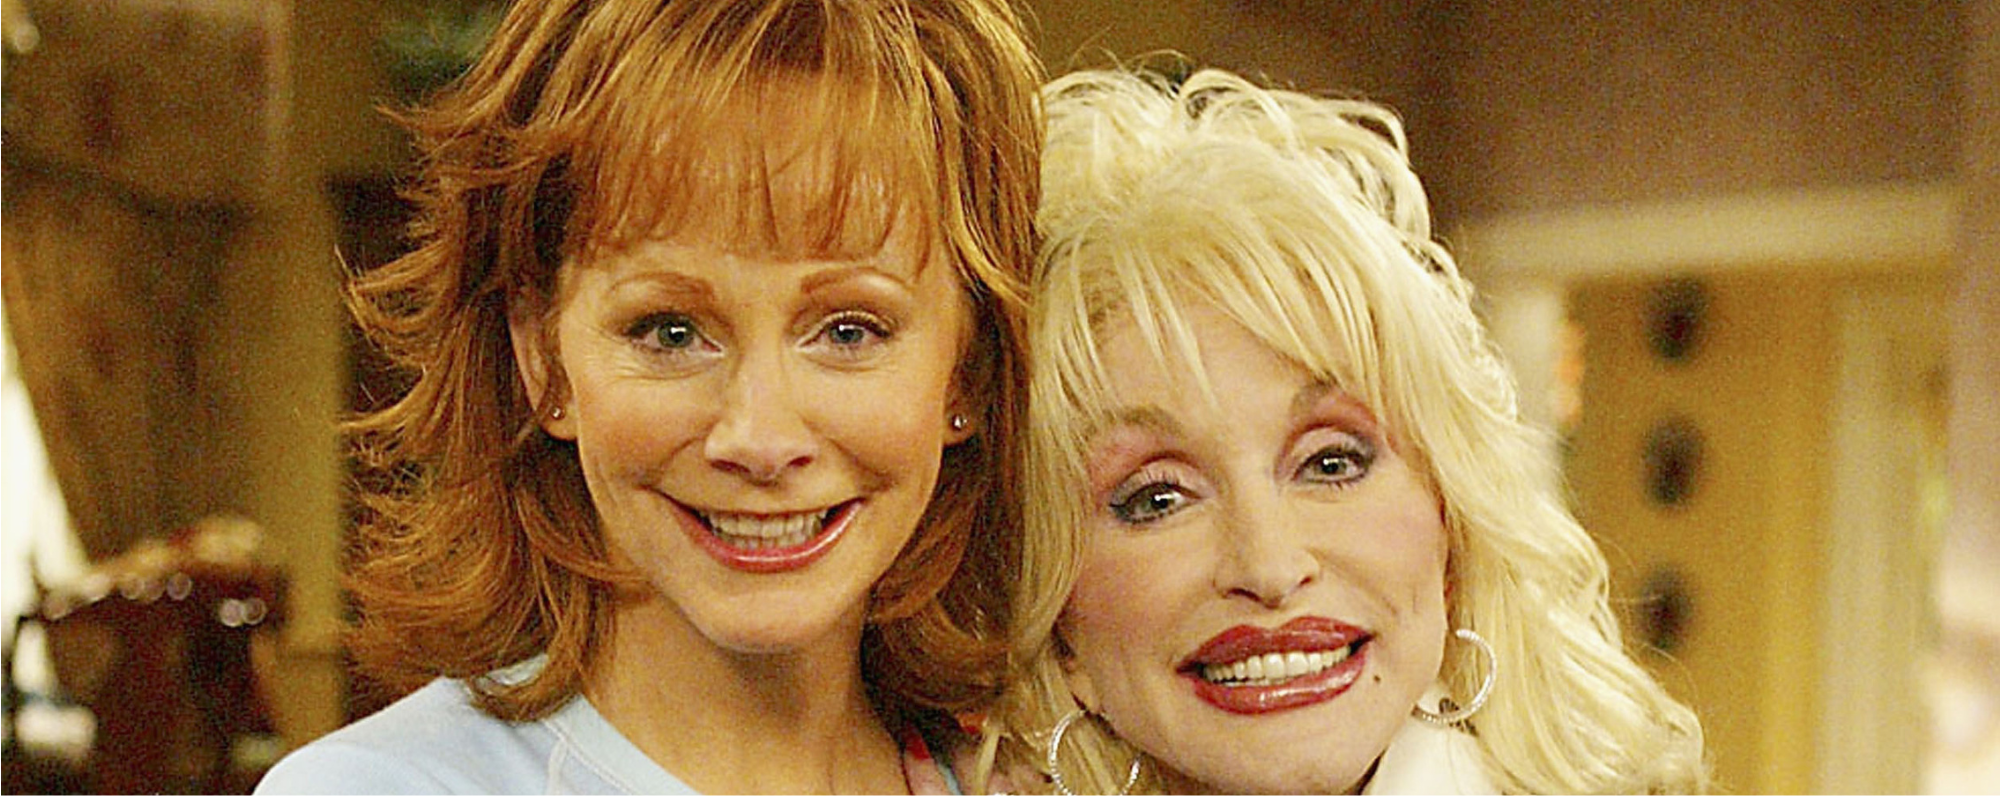 Reba McEntire Opens Up About That Time Dolly Parton Guest Starred on Her Sitcom